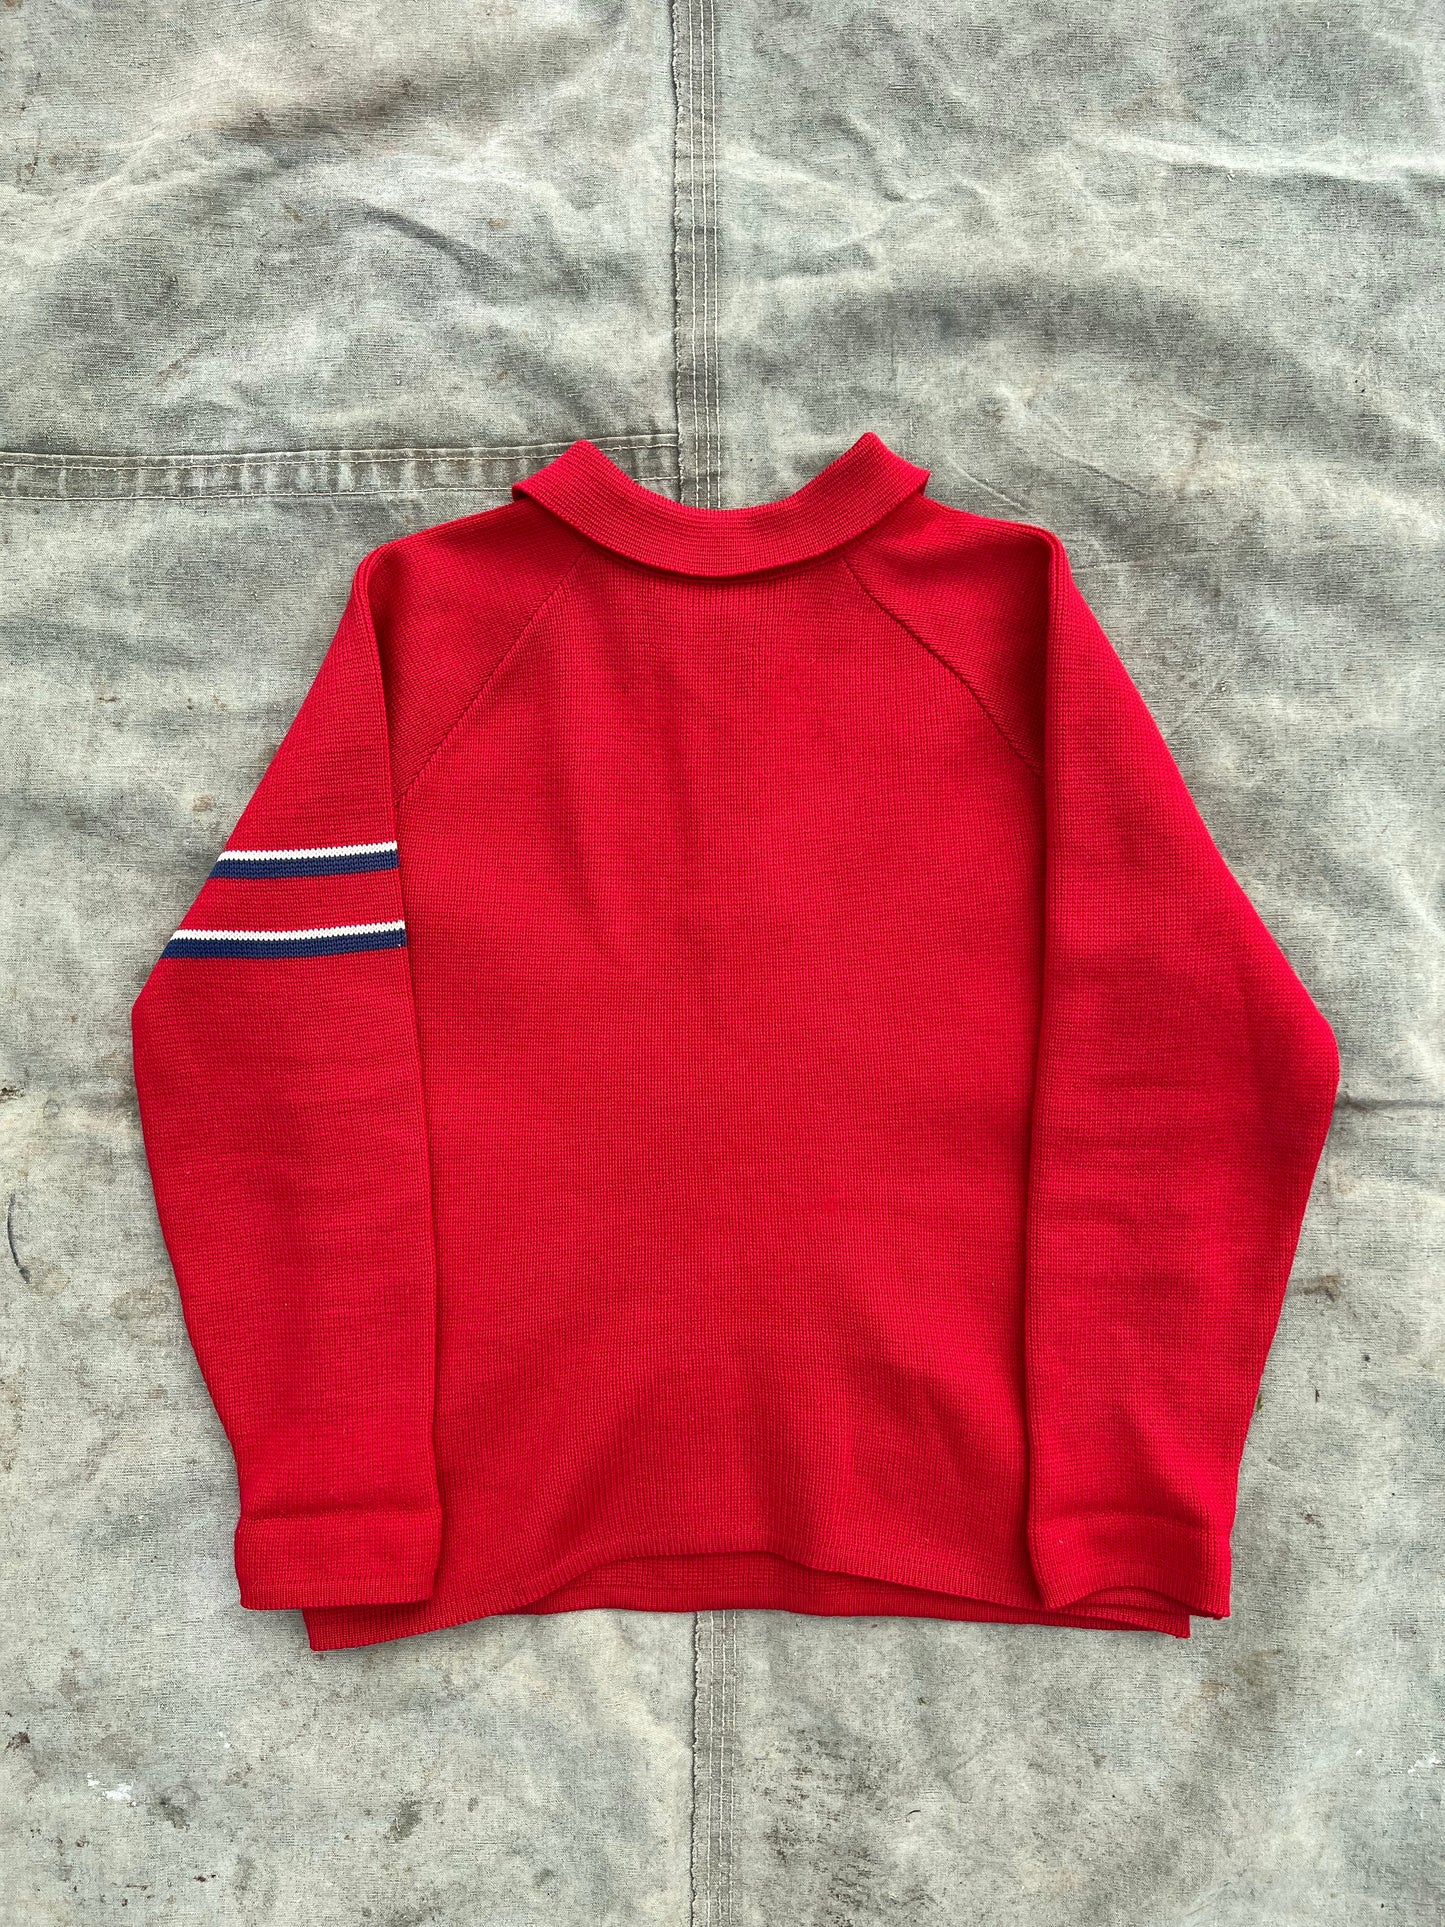 1970s RED SWEATER